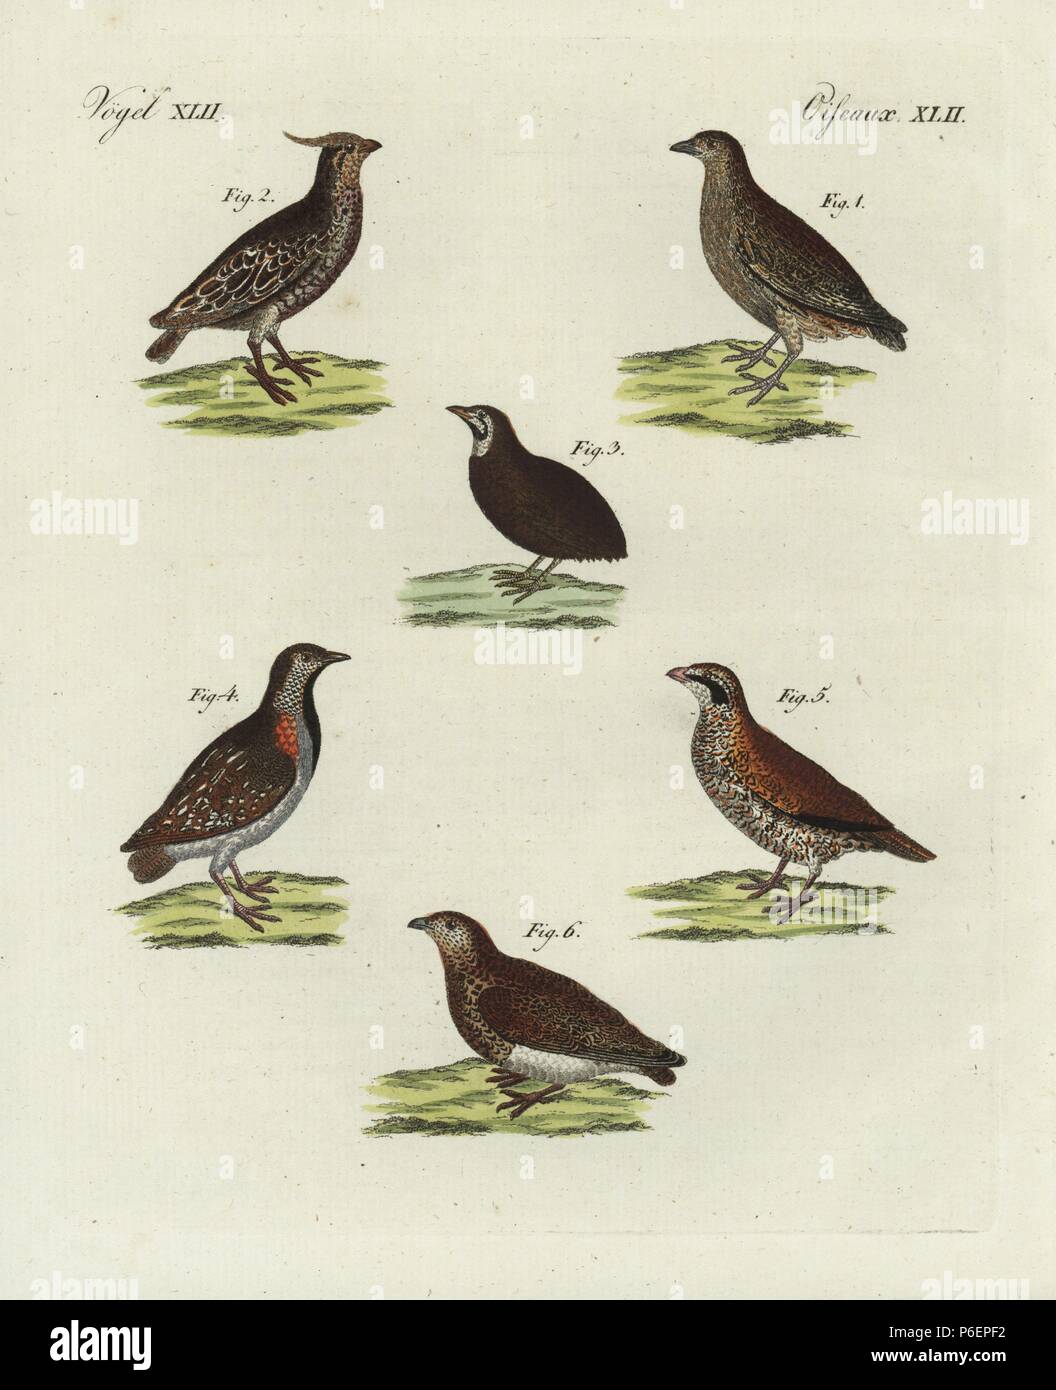 Quail, Coturnix coturnix 1, crested bobwhite, Colinus cristatus 2, blue-breasted quail, Excalfactoria chinensis 3, Madagascar buttonquail, Turnix nigricollis 4, northern bobwhite, Colinus virginianus 5, and white-bellied seedsnipe, Attagis malouinus. Handcoloured copperplate engraving from Bertuch's 'Bilderbuch fur Kinder' (Picture Book for Children), Weimar, 1798. Friedrich Johann Bertuch (1747-1822) was a German publisher and man of arts most famous for his 12-volume encyclopedia for children illustrated with 1,200 engraved plates on natural history, science, costume, mythology, etc., publis Stock Photo